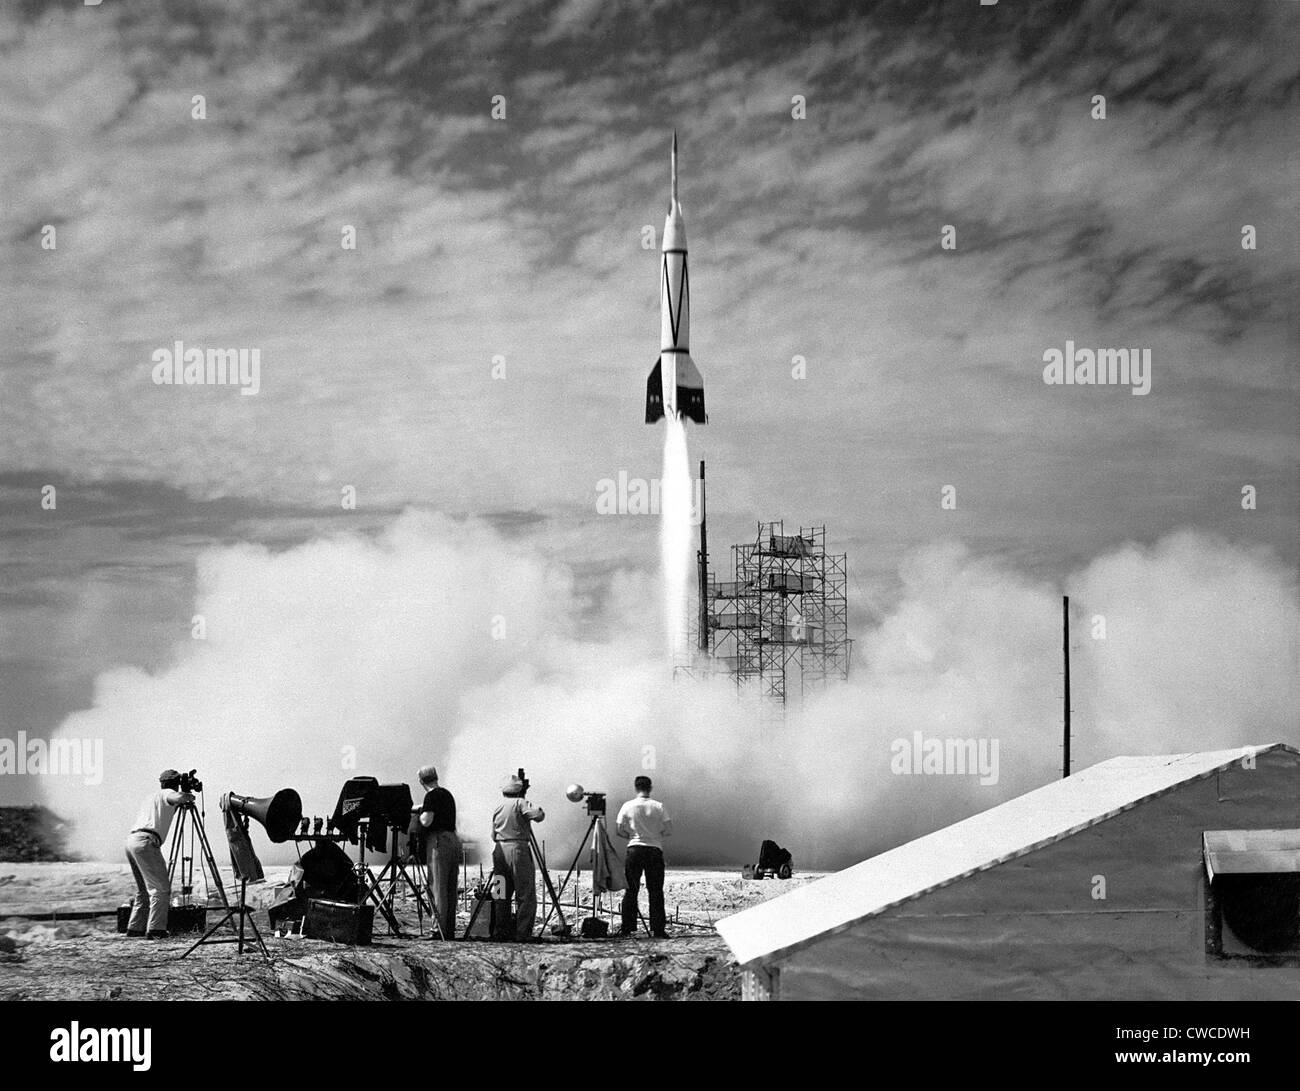 V-2 copy launched. The US rocket was based on the German V-2 missile and was the first missile launched at Cape Canaveral on Stock Photo